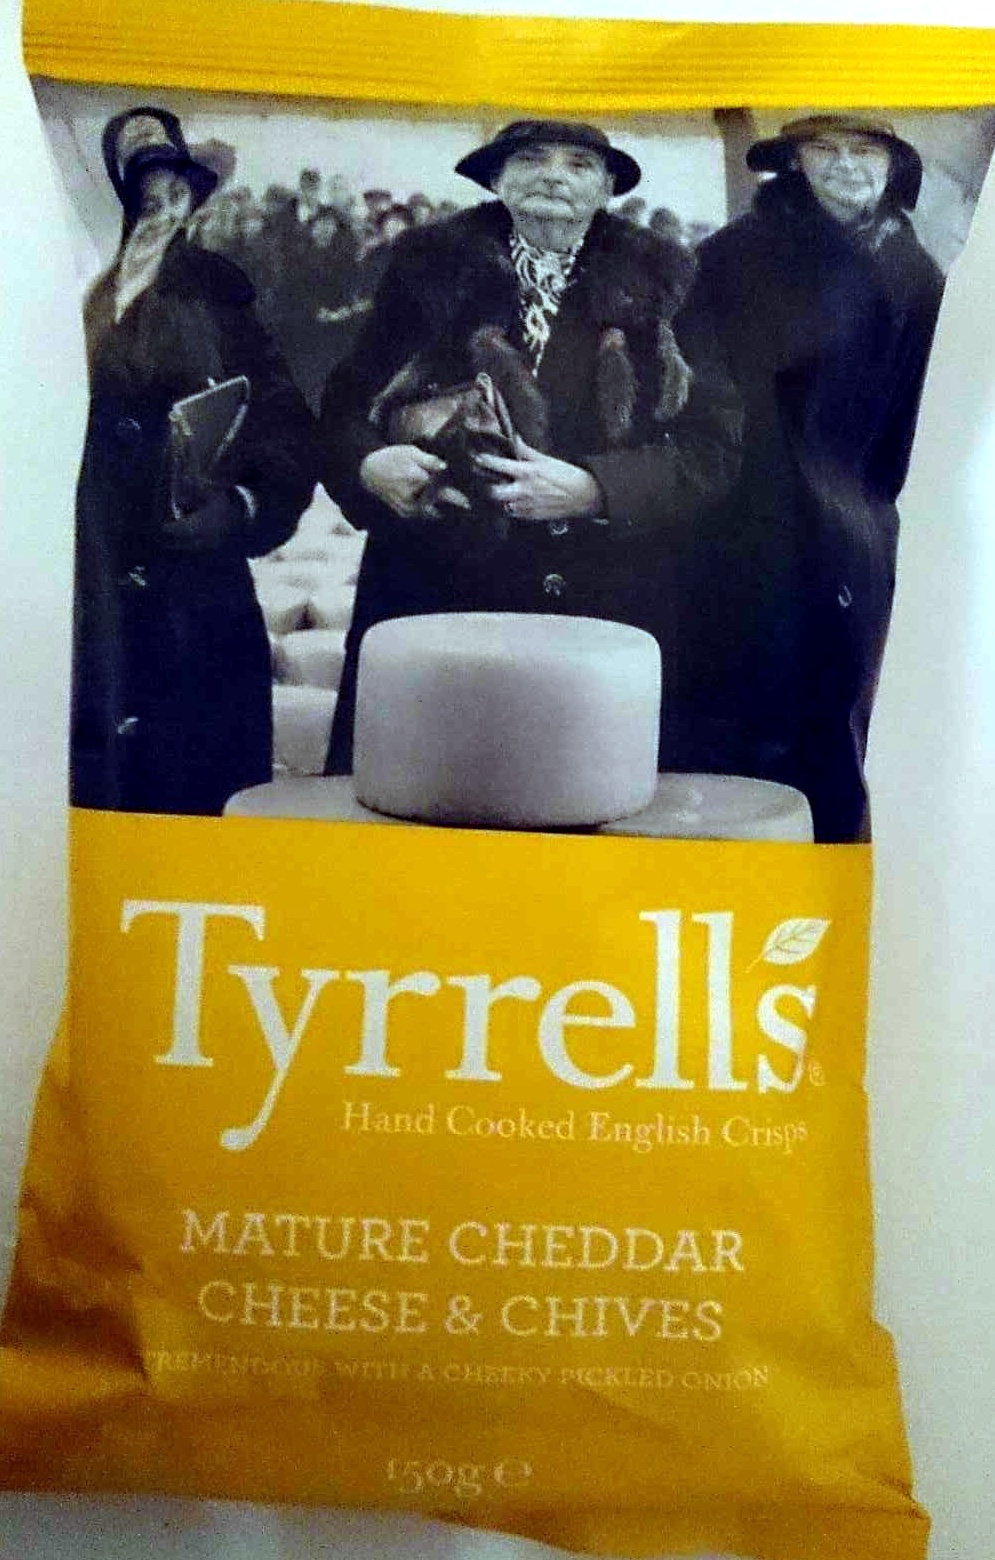 Hand cooked English Crisps Mature Cheddar Cheese & Chives - Product